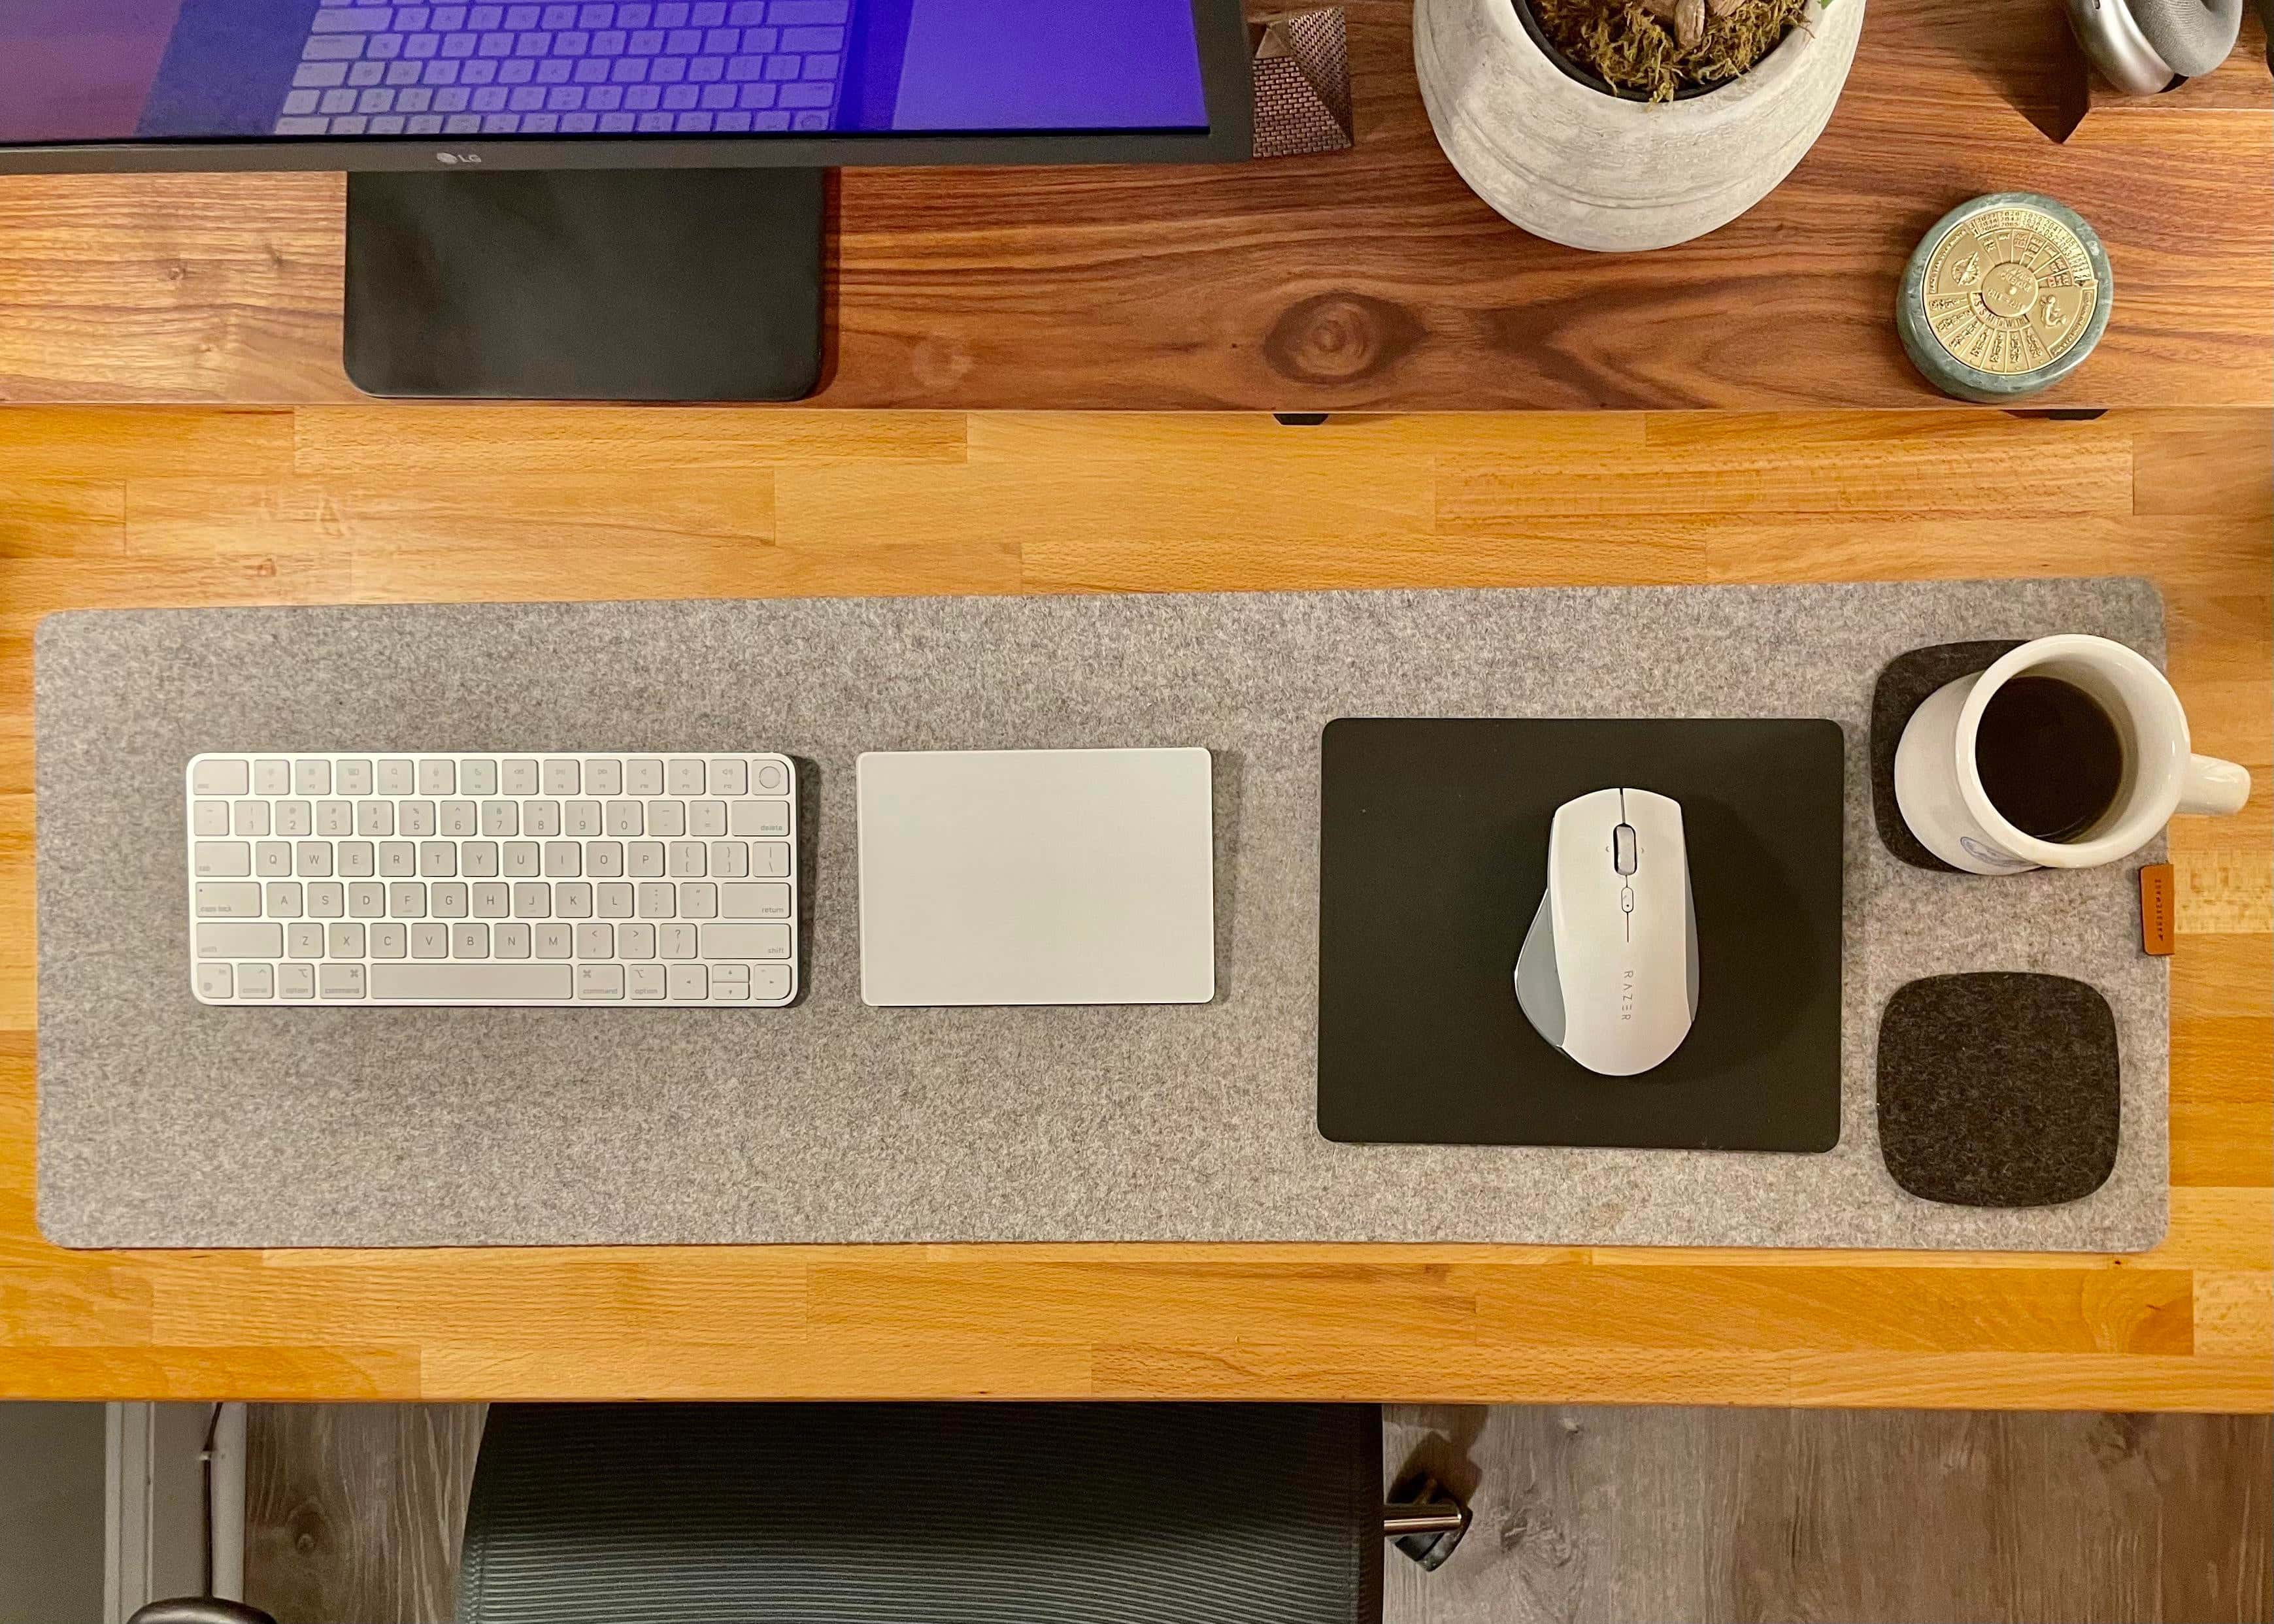 On a Grovemade desk mat, a Magic Keyboard with Touch ID, a Magic Trackpad and a Razer mouse handle input duties.